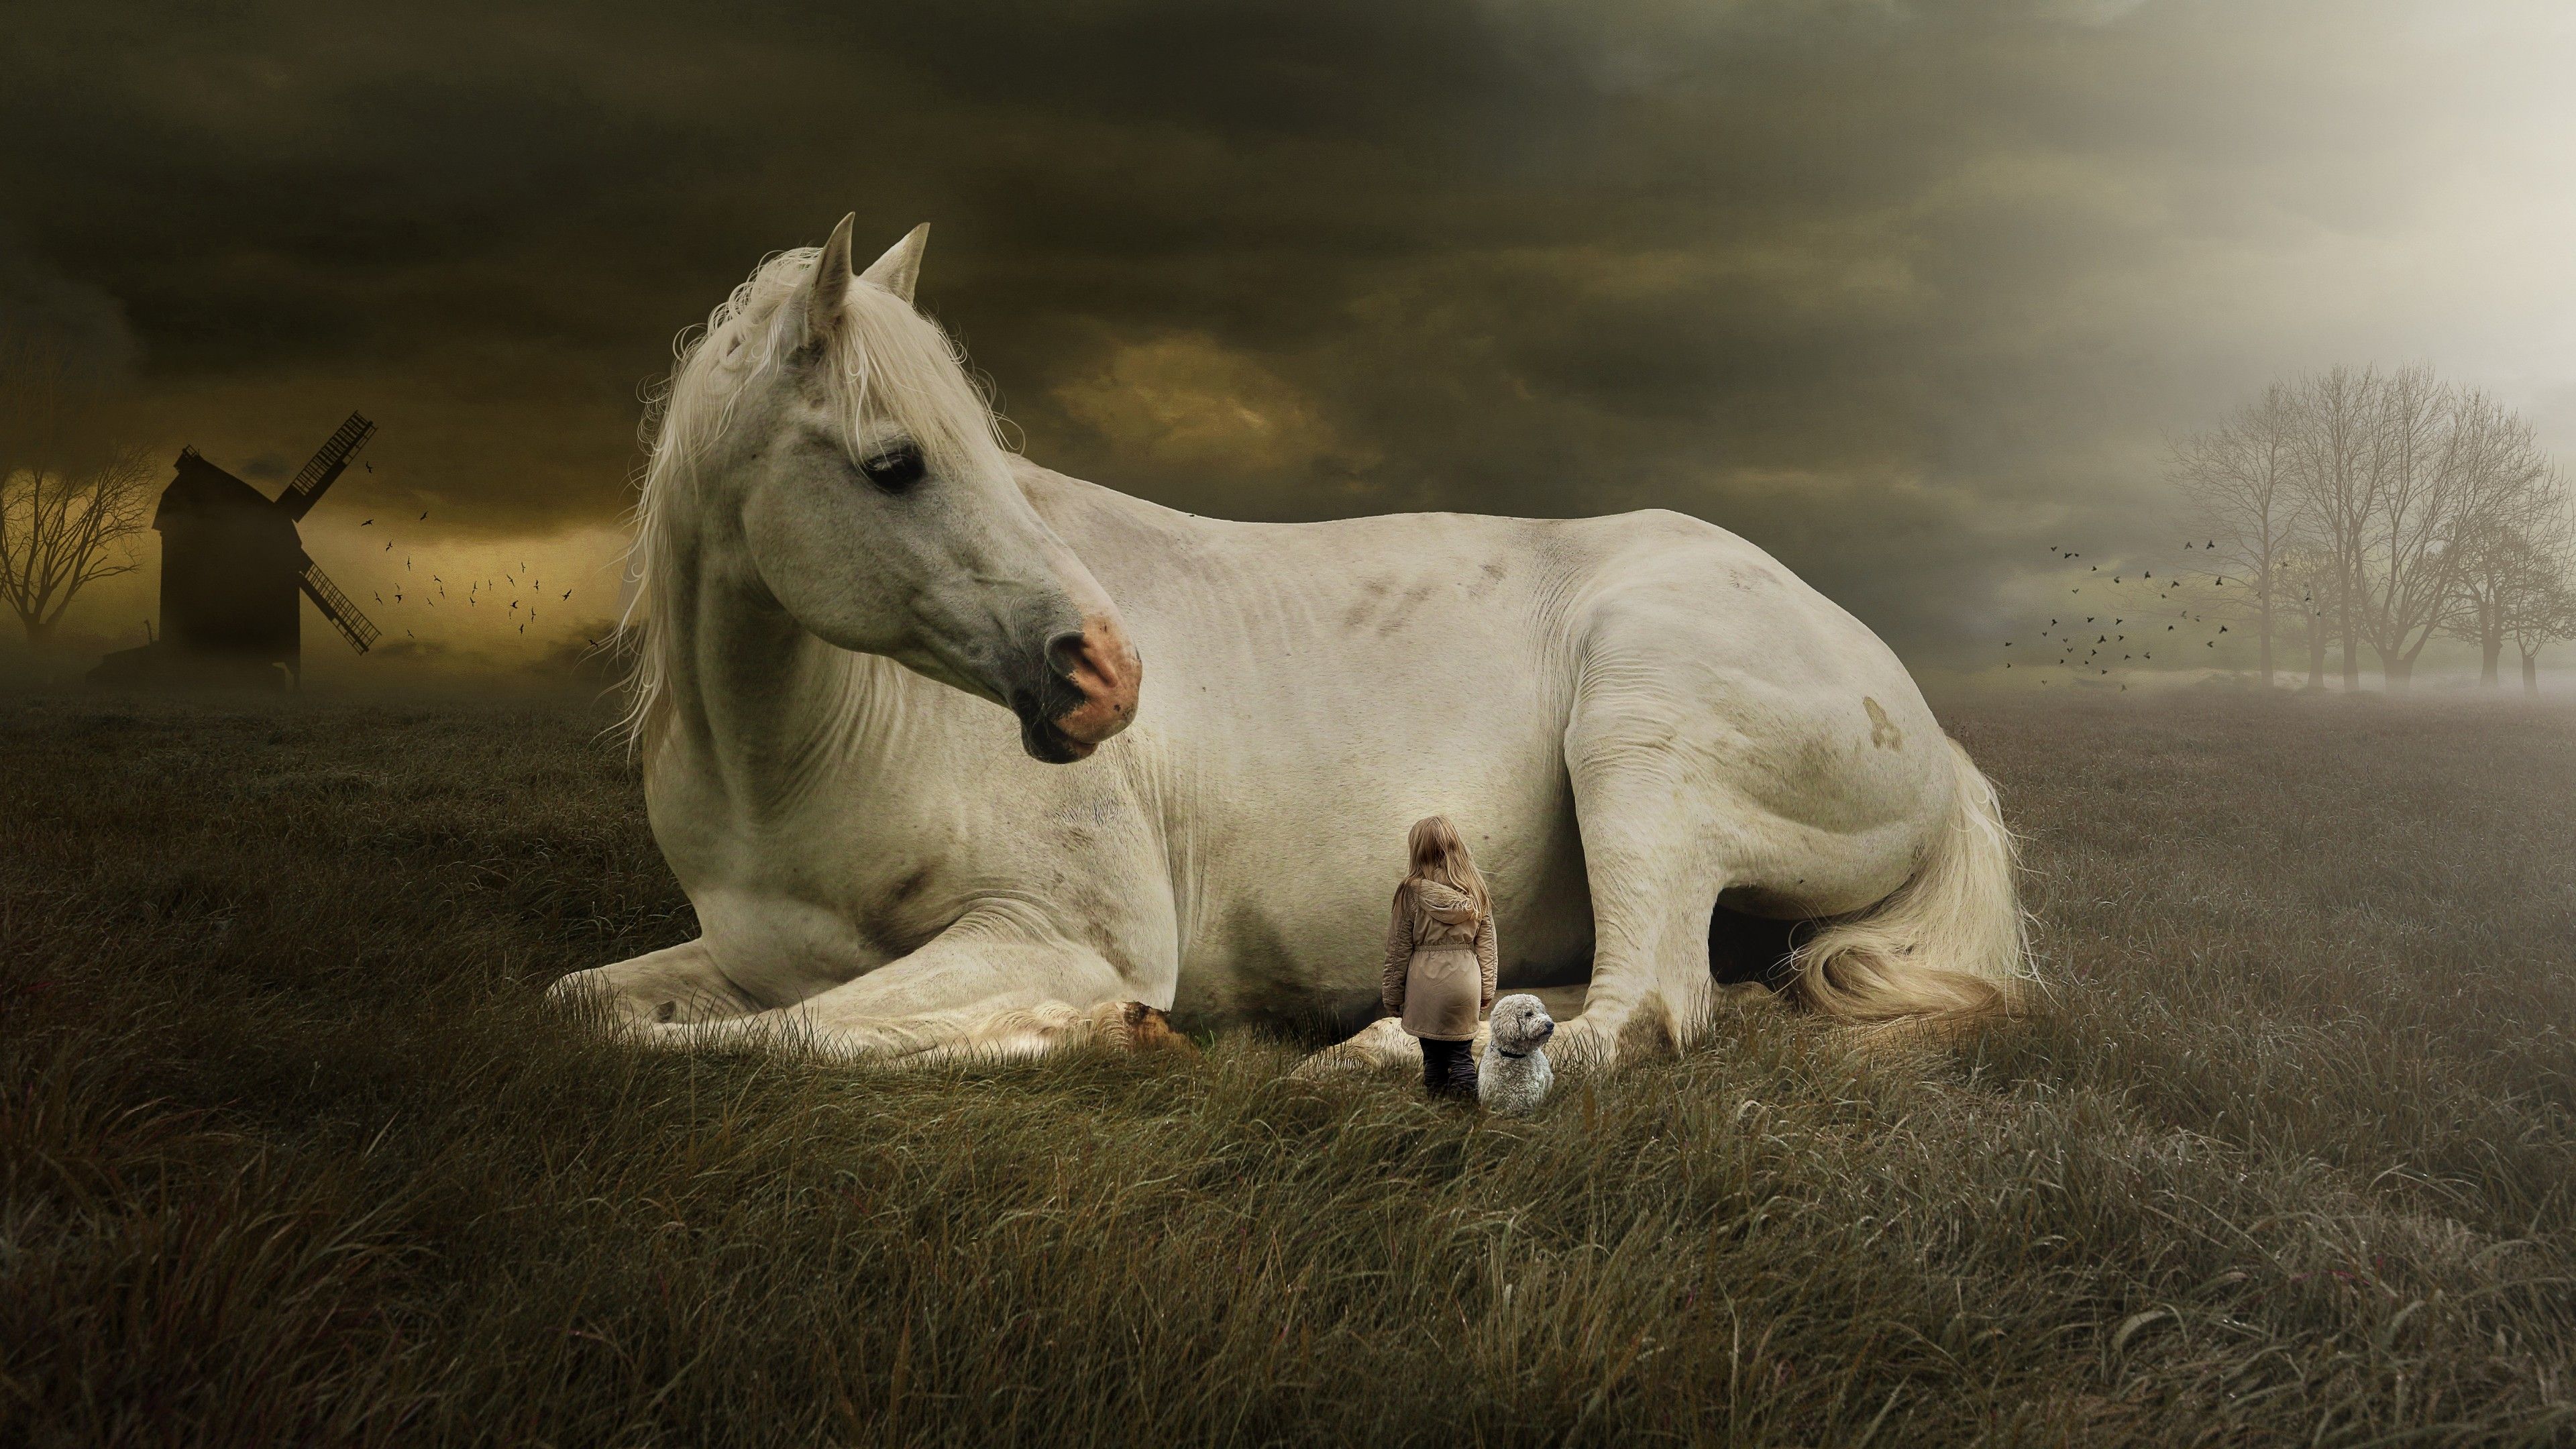 Wallpaper White horse, Cute girl, Cute dog, Landscape, Dream, 5K, Animals,. Wallpaper for iPhone, Android, Mobile and Desktop